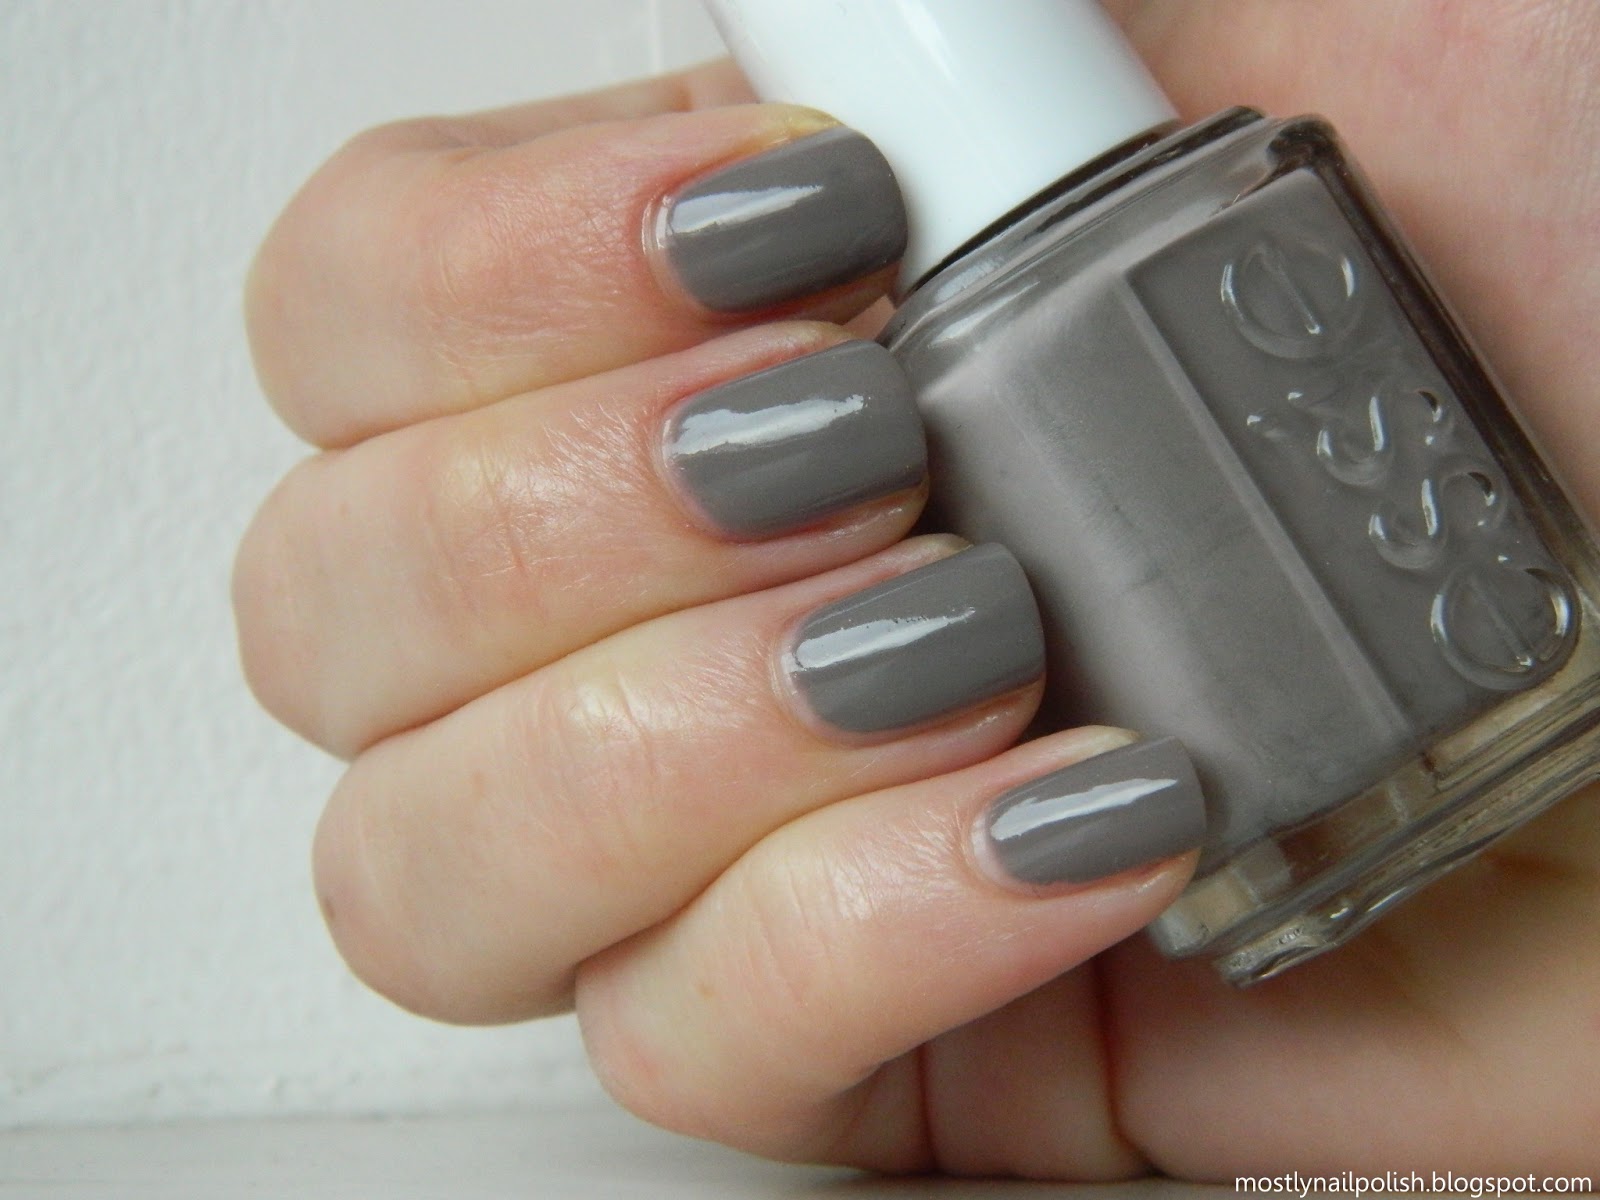 2. Essie Nail Polish in "Chinchilly" - wide 4